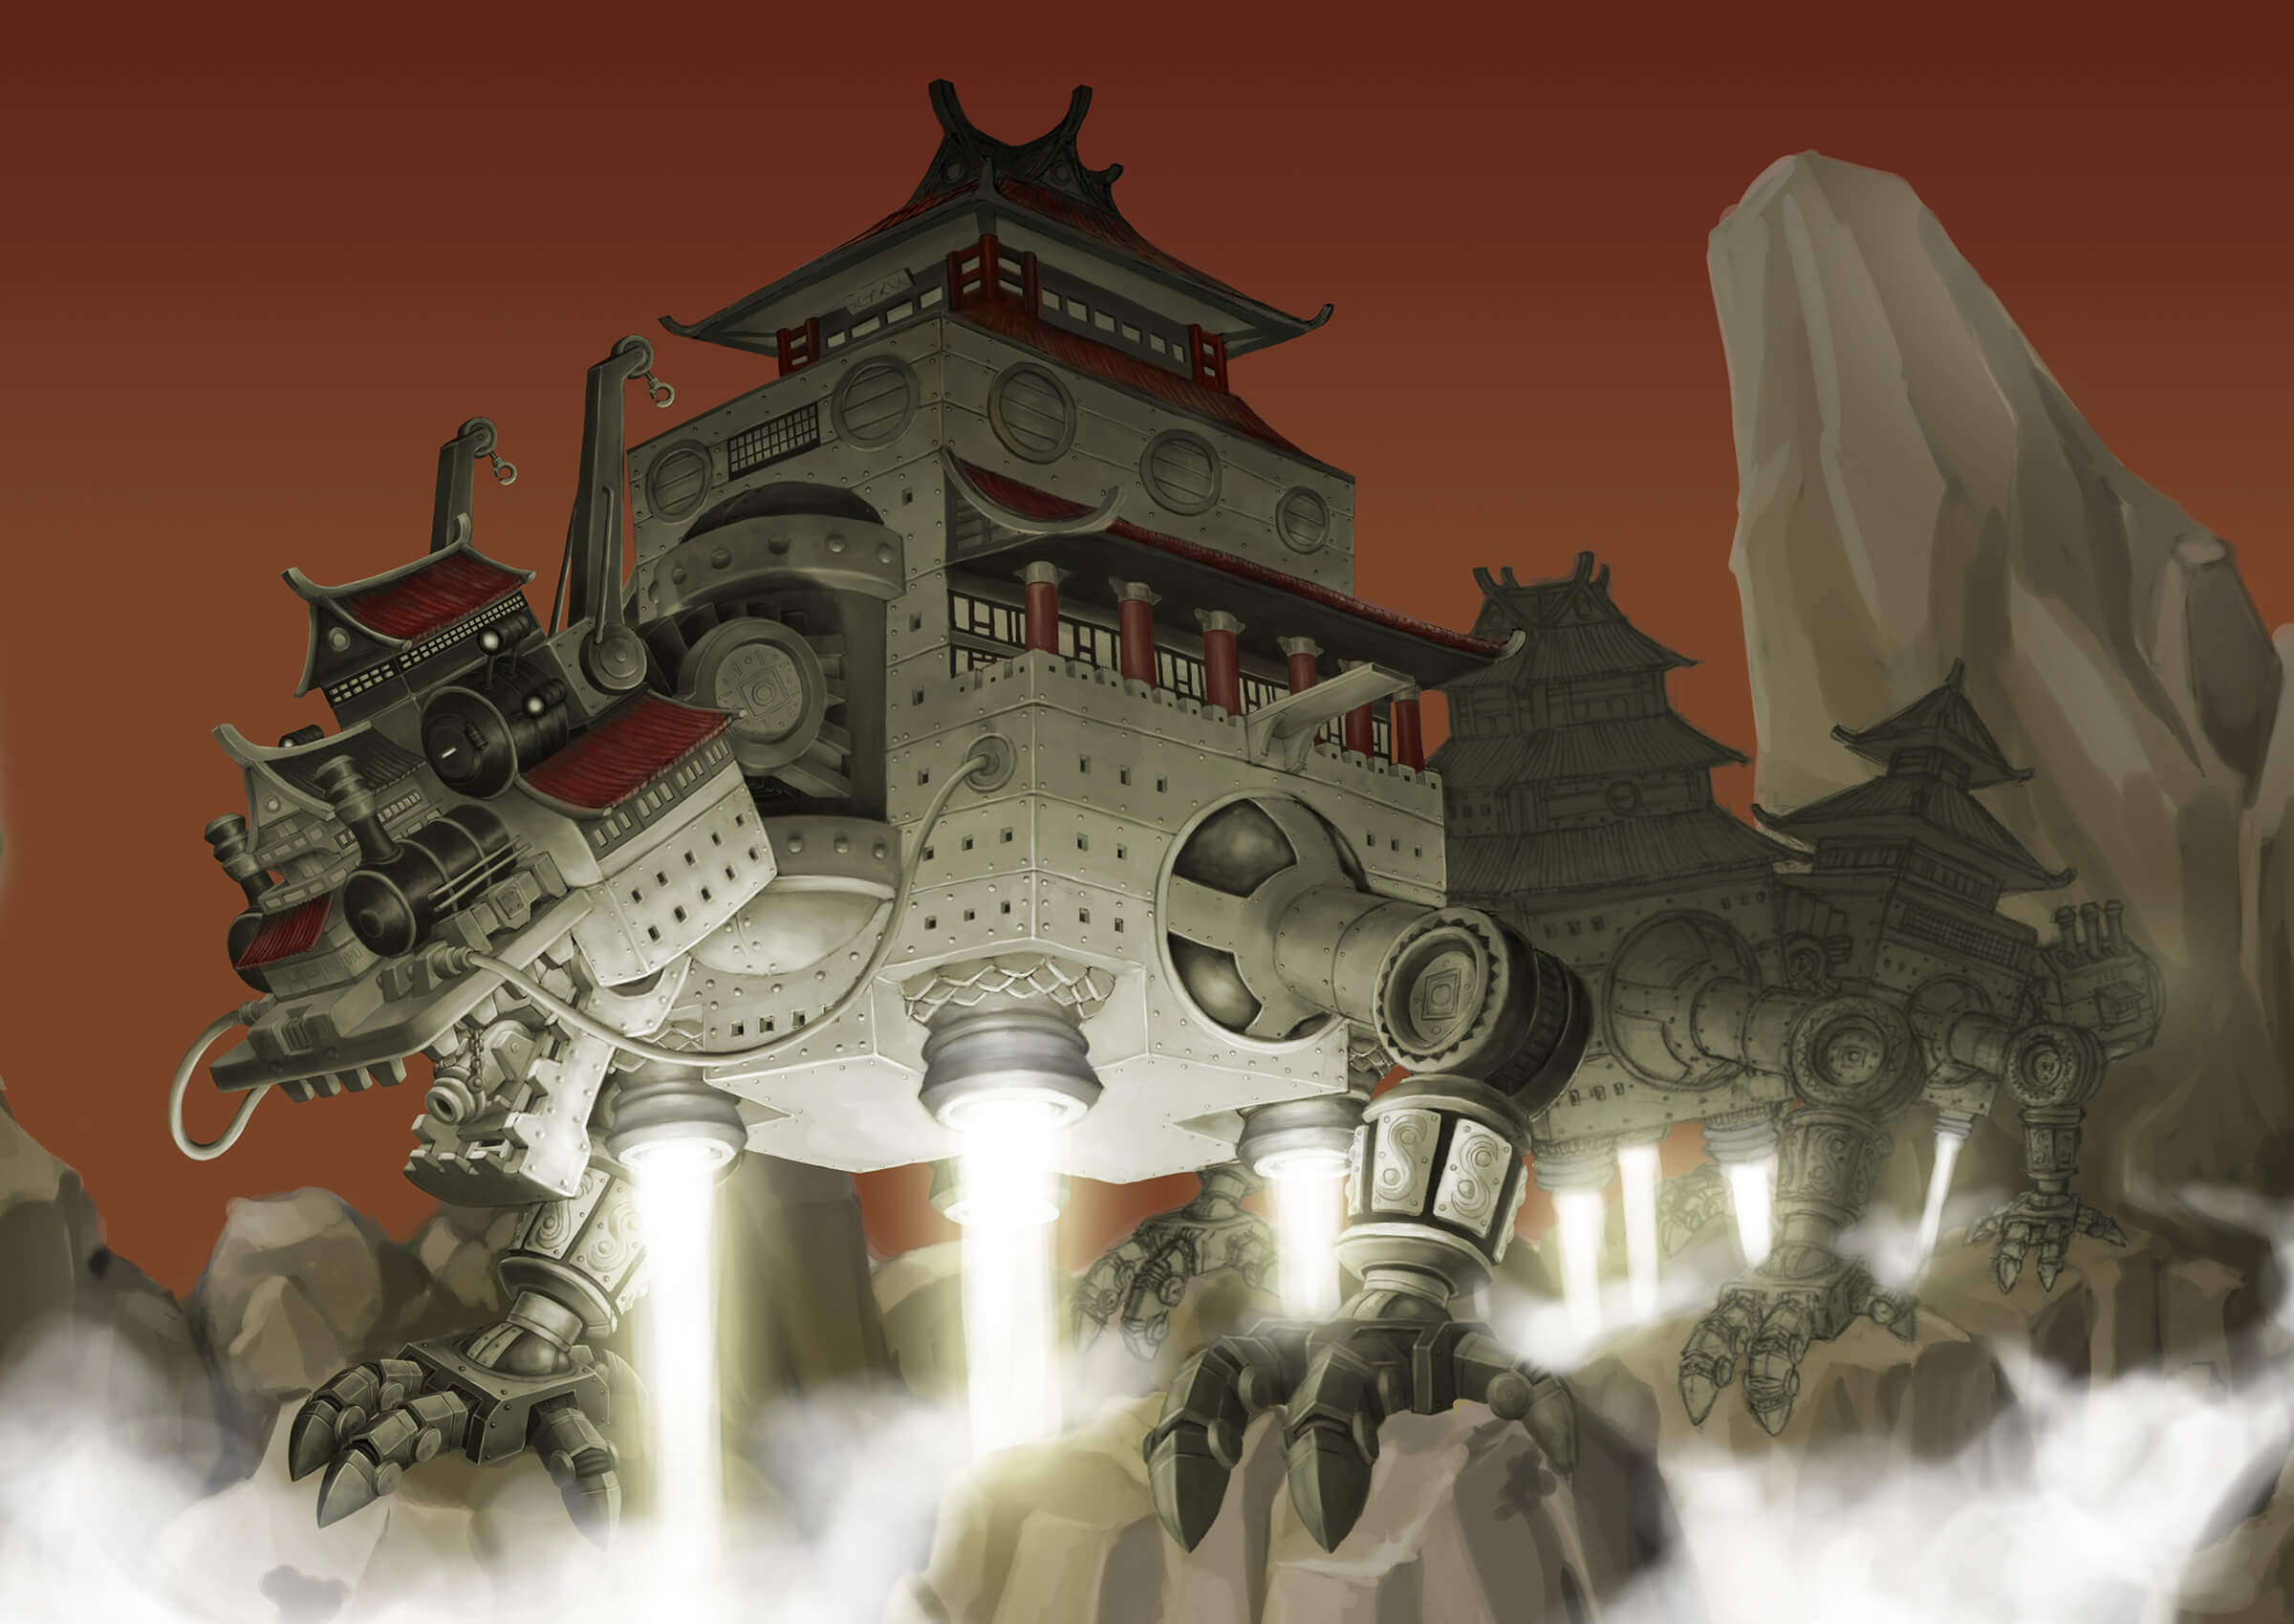 A massive steampunk-style metal dragon made up of interconnected pagoda-style fortresses crawls across a mountain range.